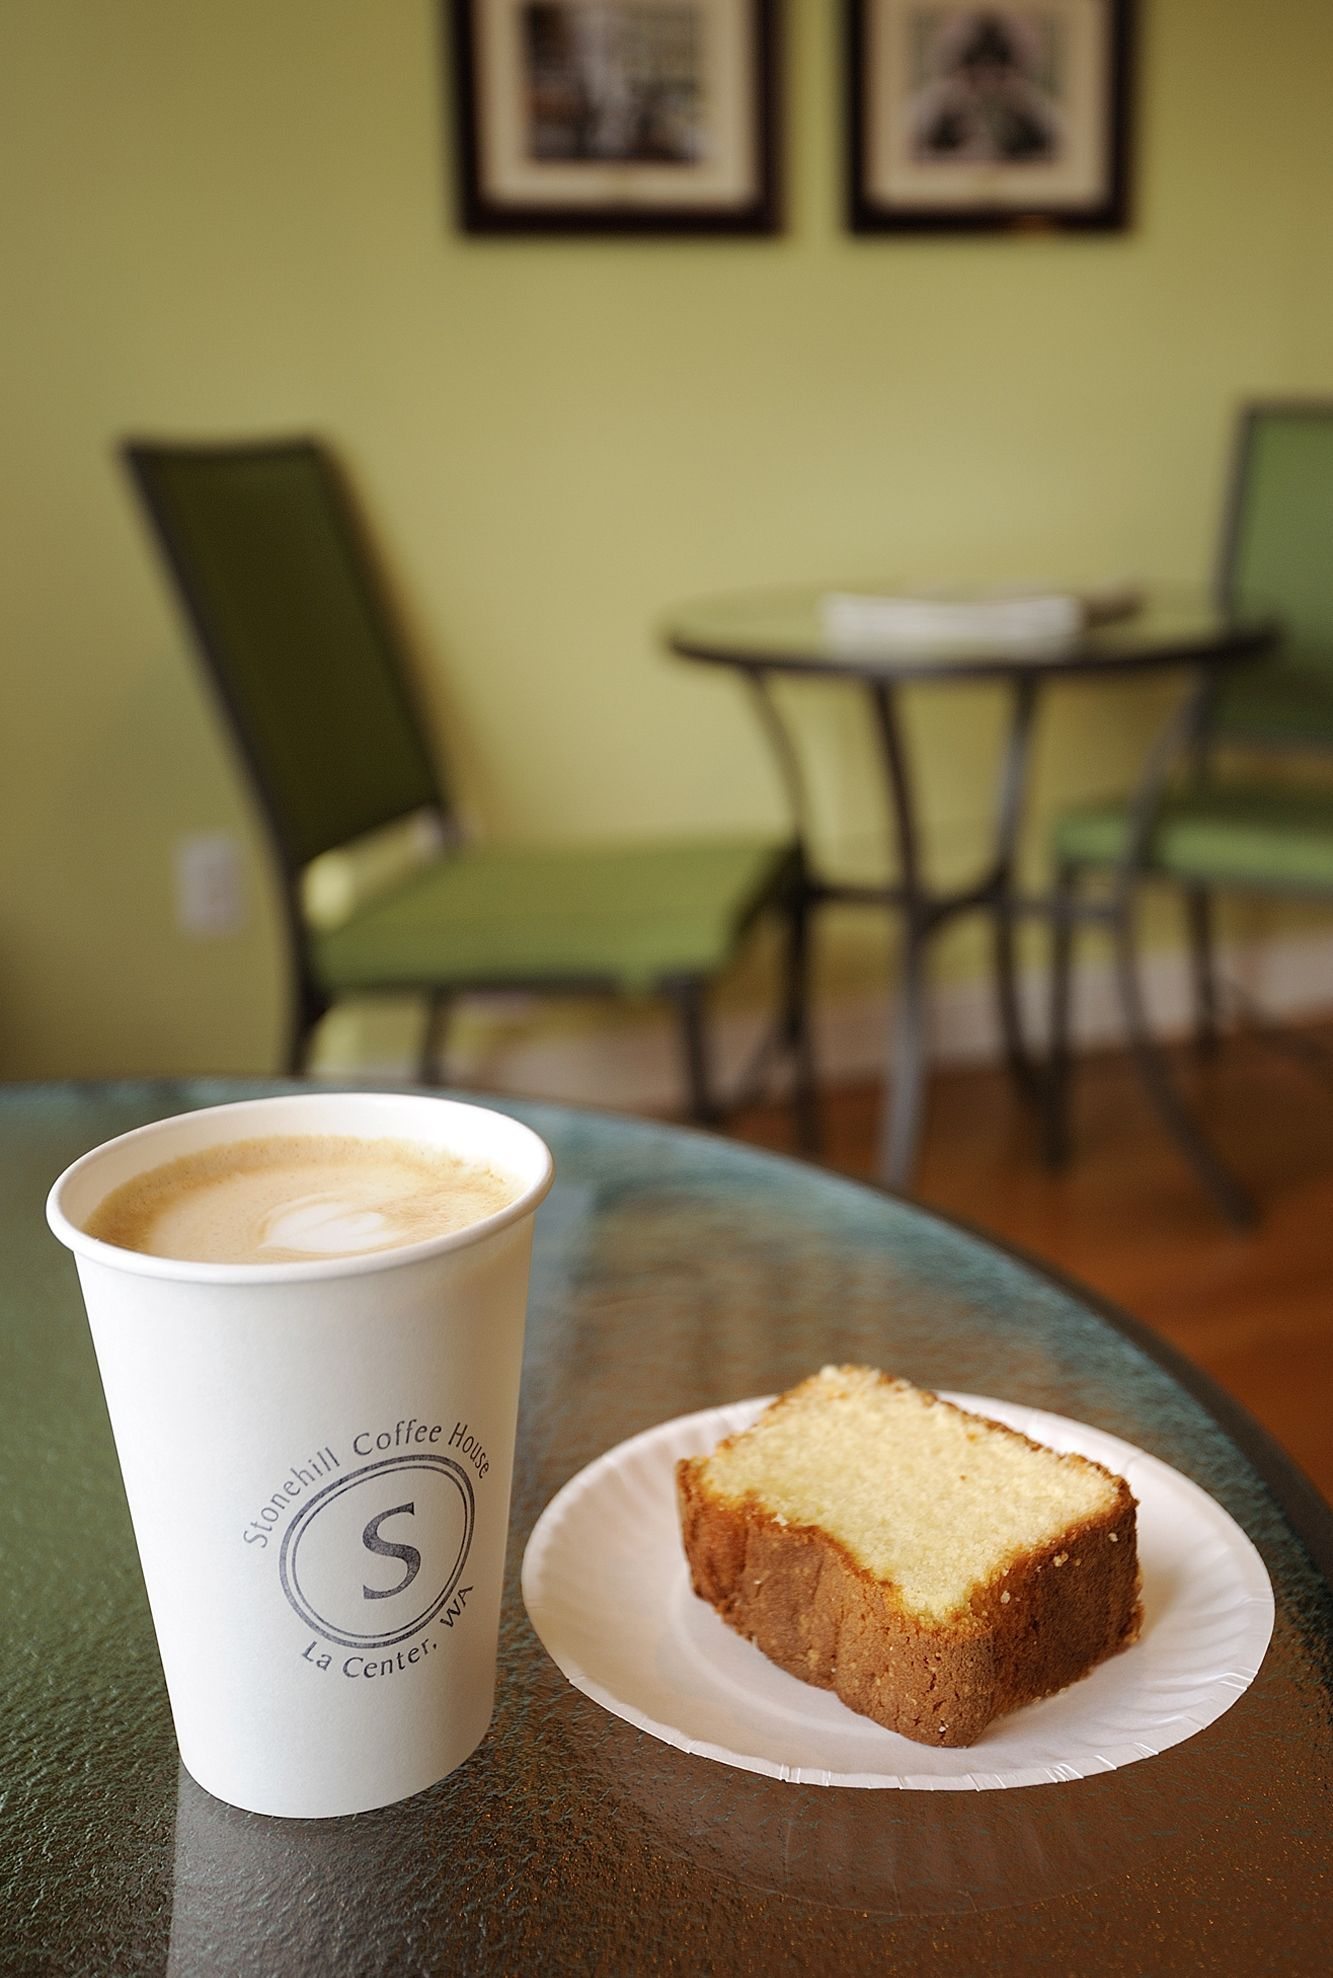 Stonehill Coffee House serves Lattes and Lemon Pound Cake in its owners' La Center home.